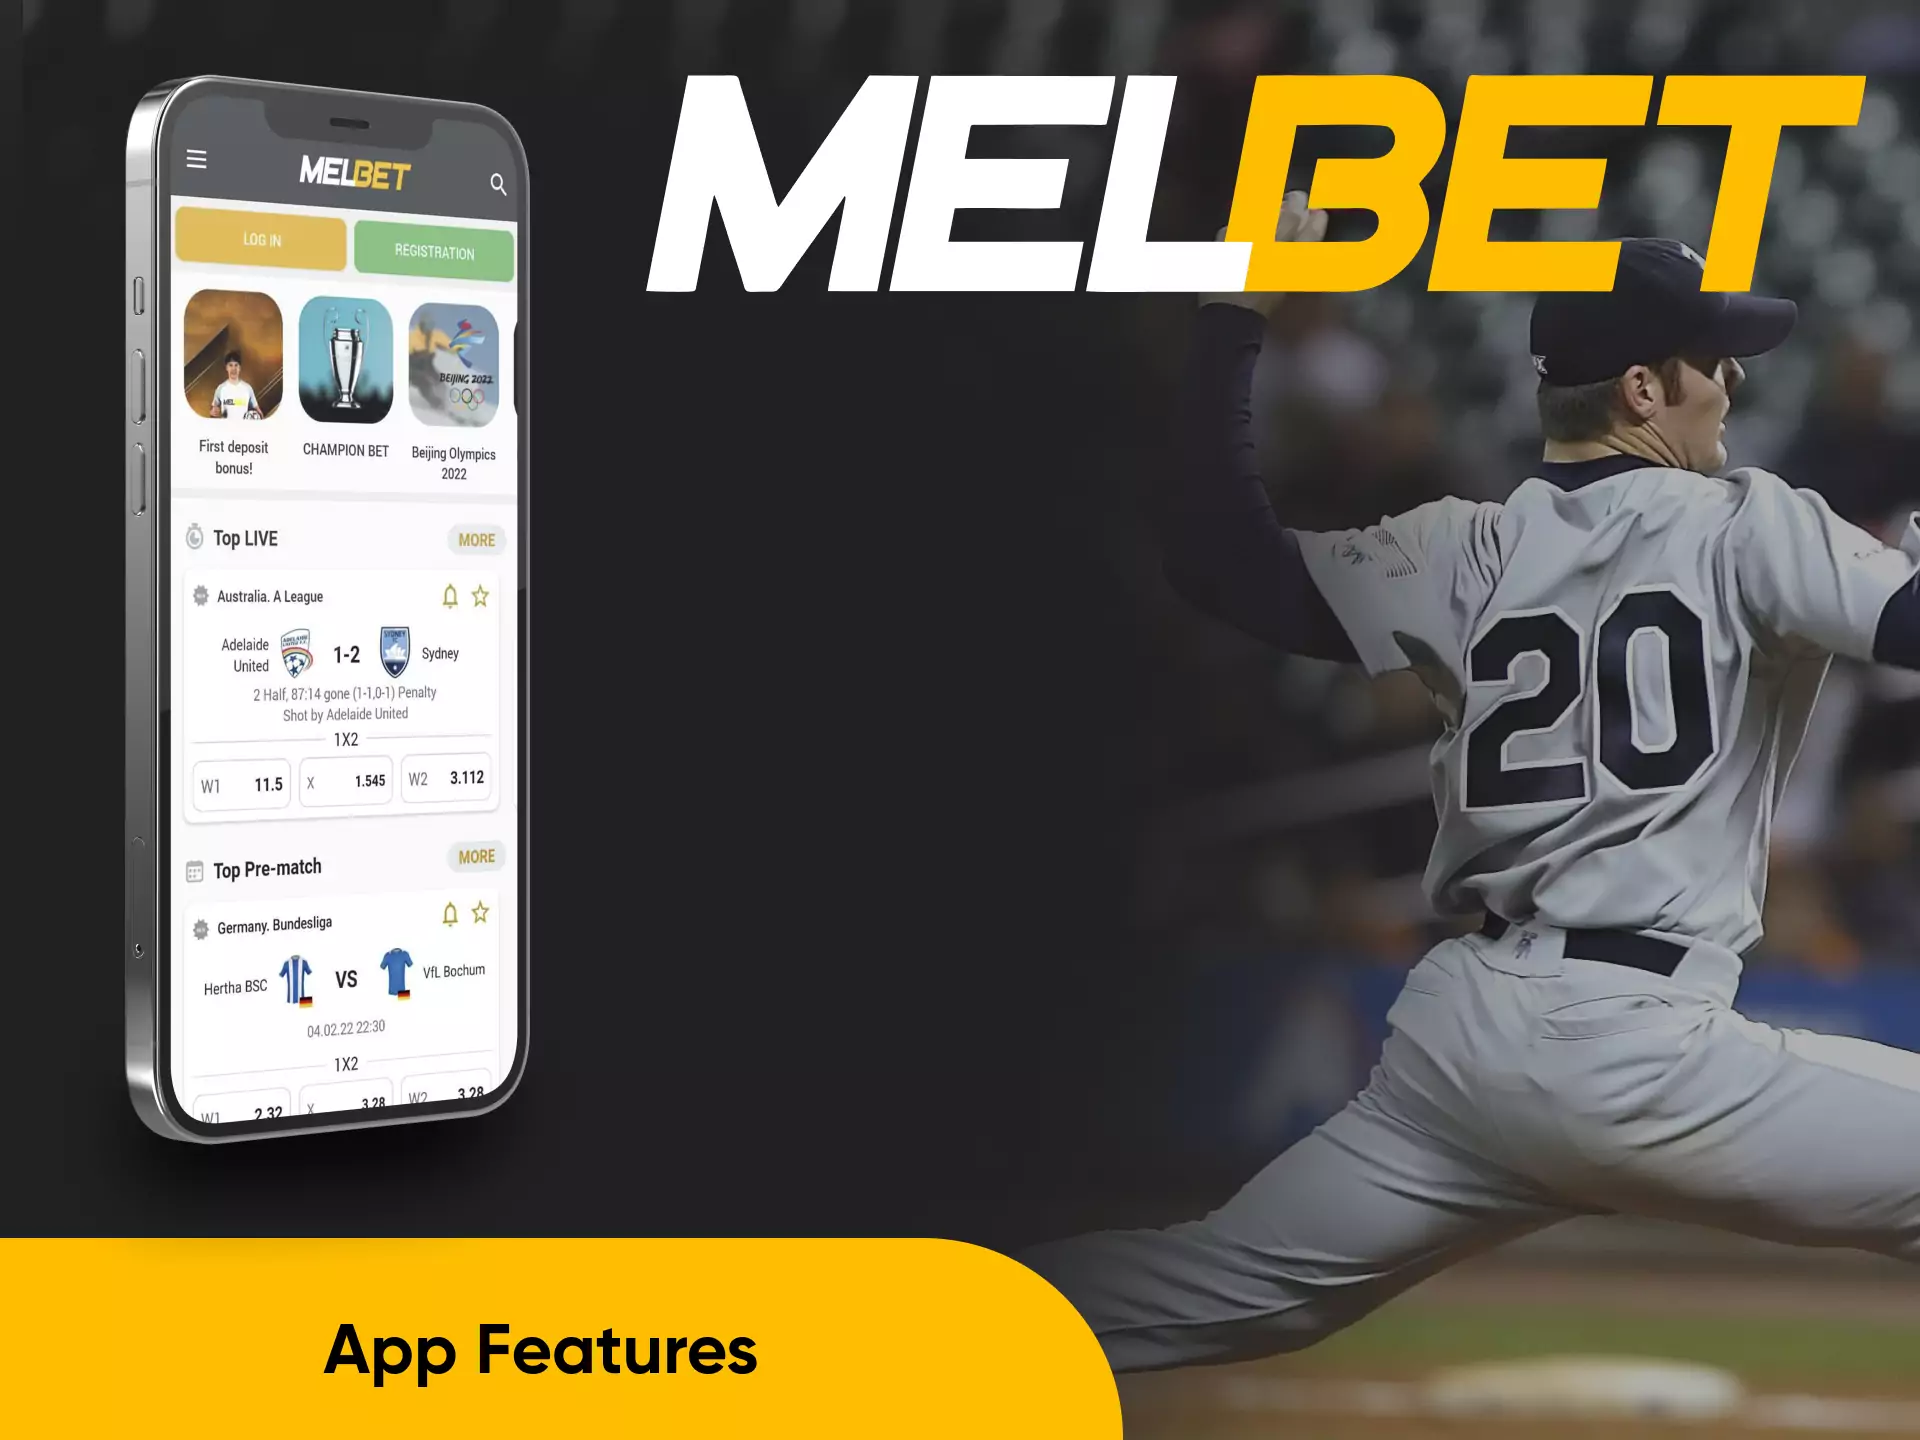 The Melbet app works great and smoothly on any device.